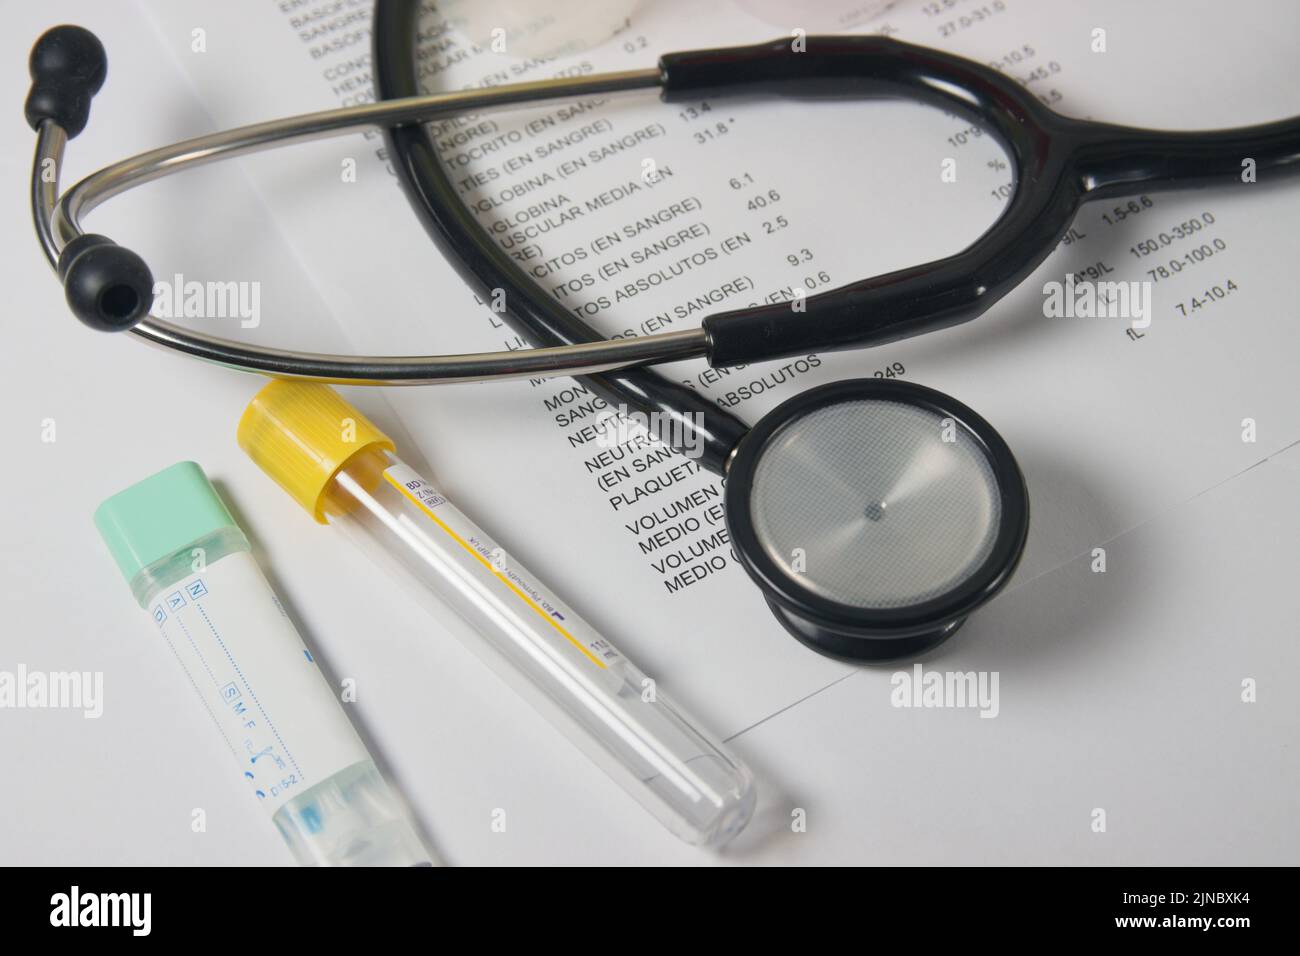 A doctor's stethoscope sits on top of blood test results printouts, along with containers for collecting urine and fecal occult blood samples Stock Photo